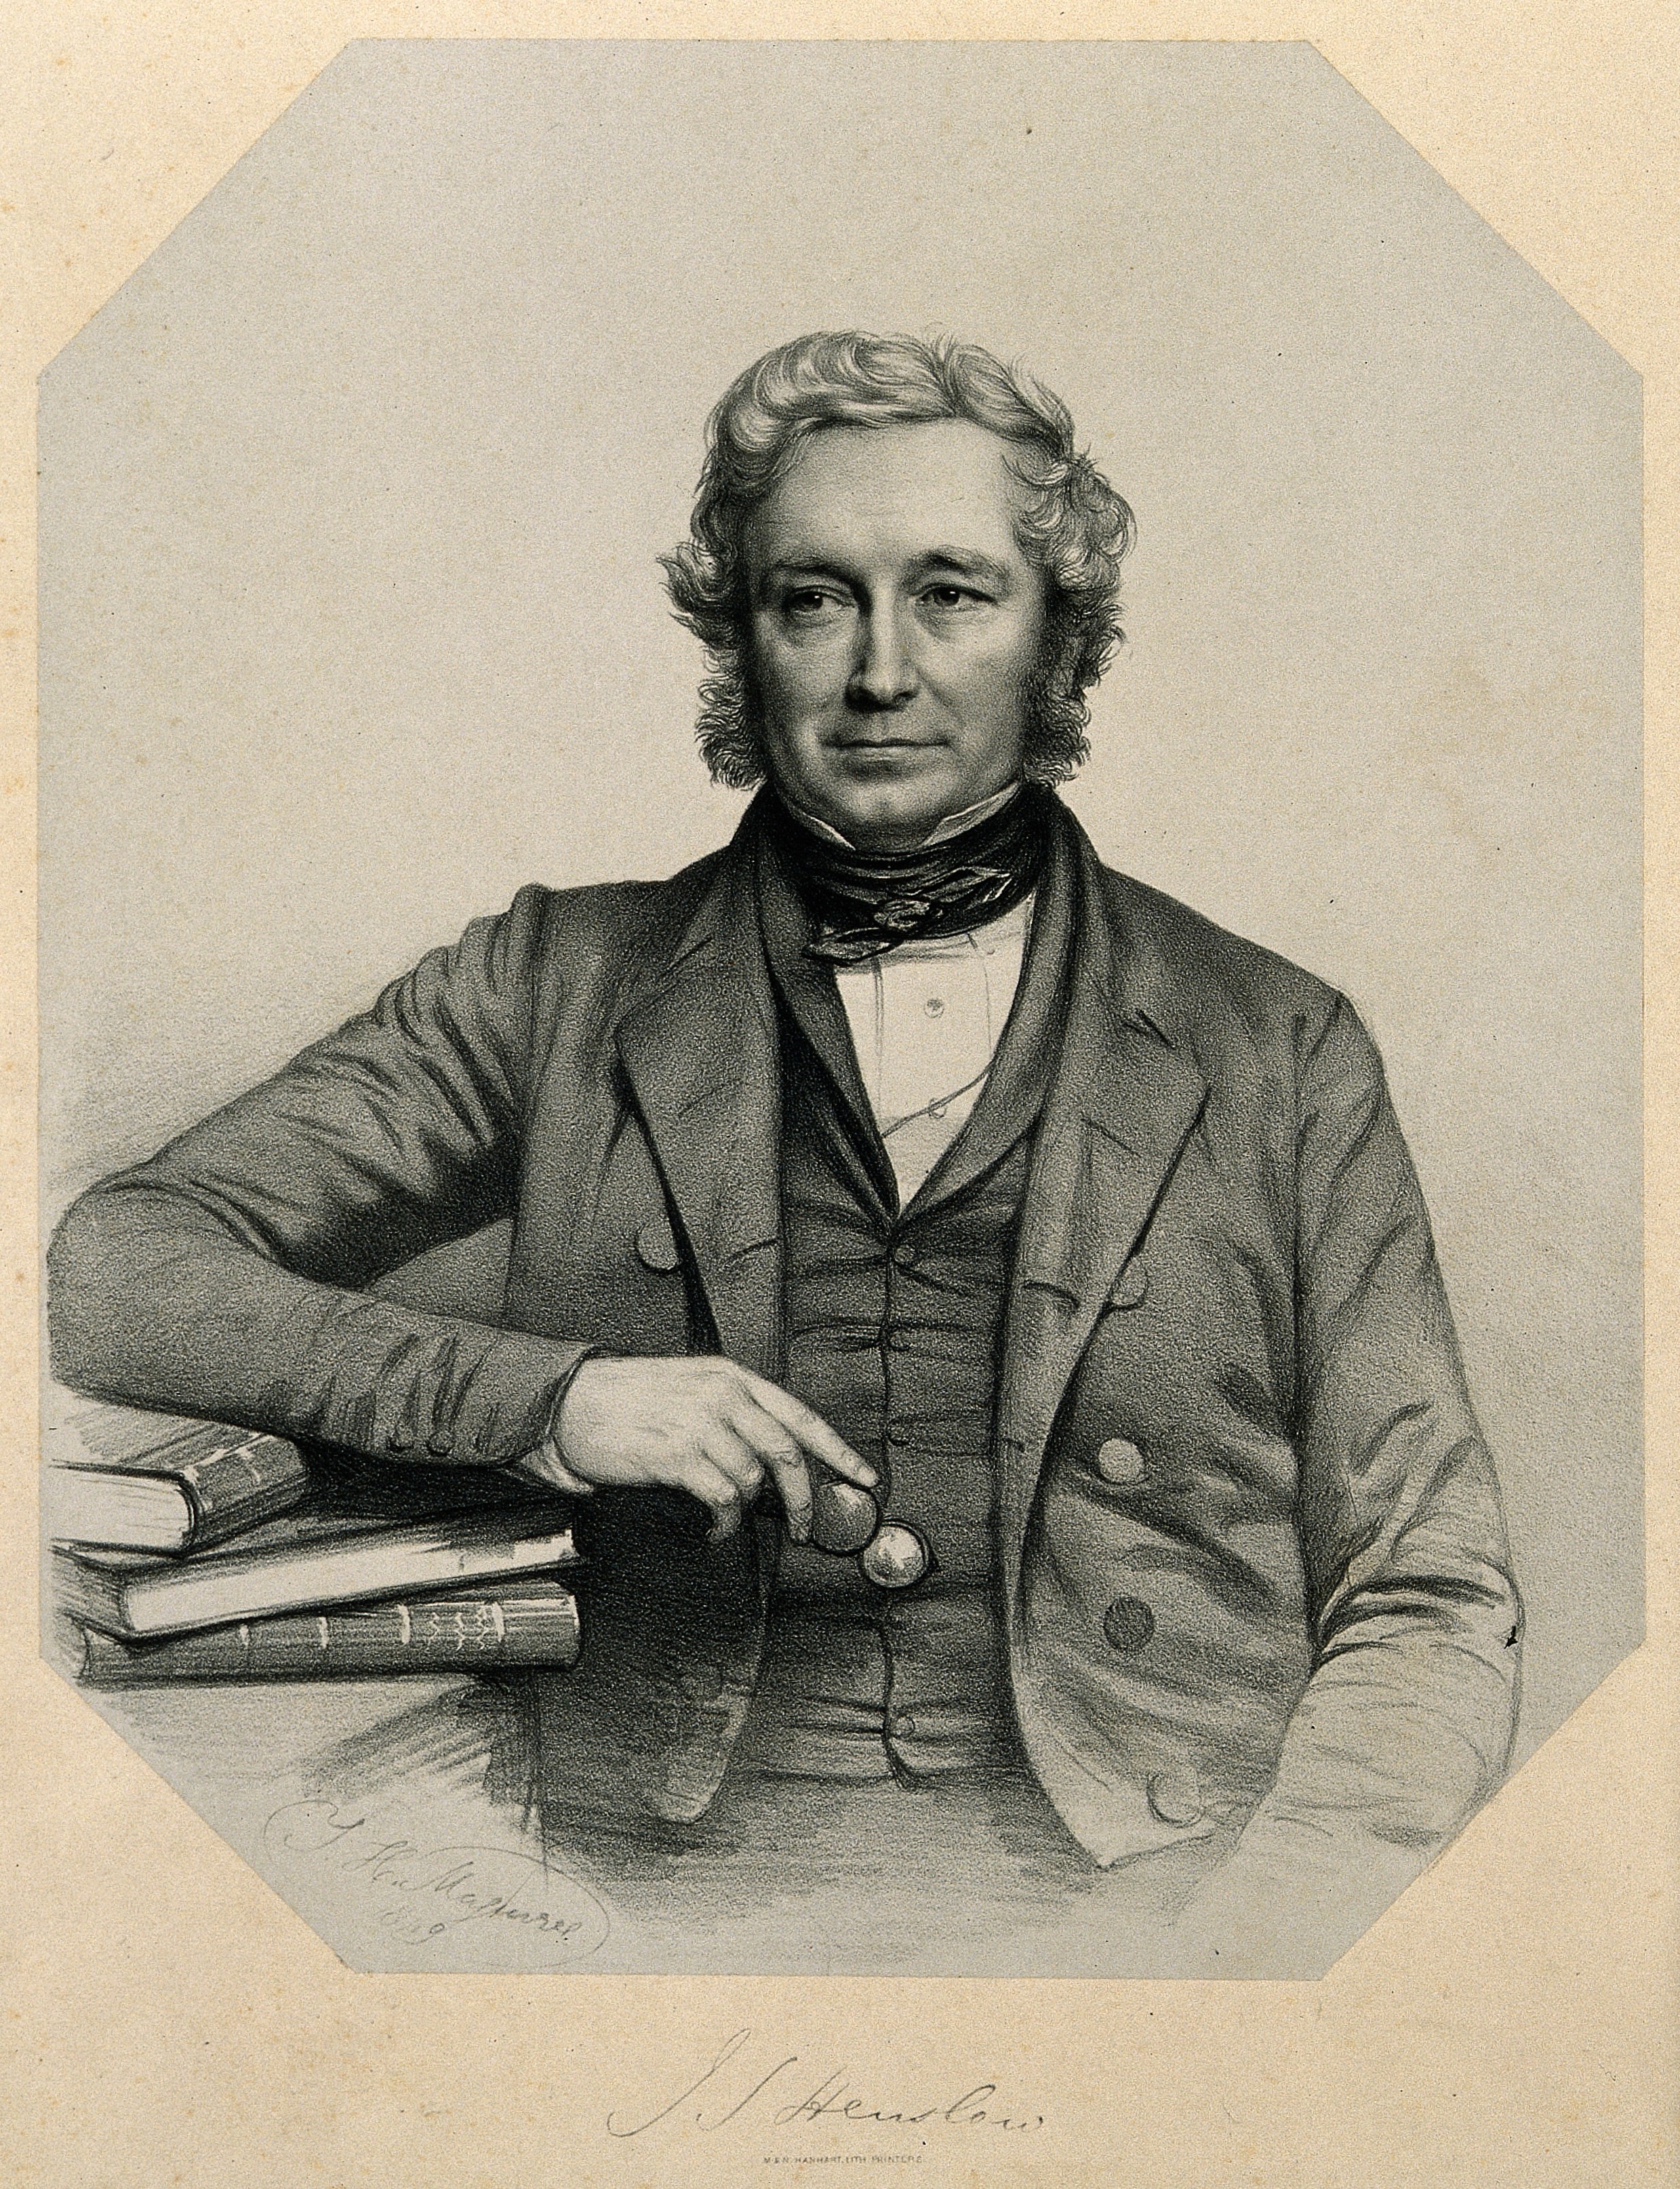 John Stevens Henslow. Lithograph by T. H. Maguire, 1849. Wellcome V0002695